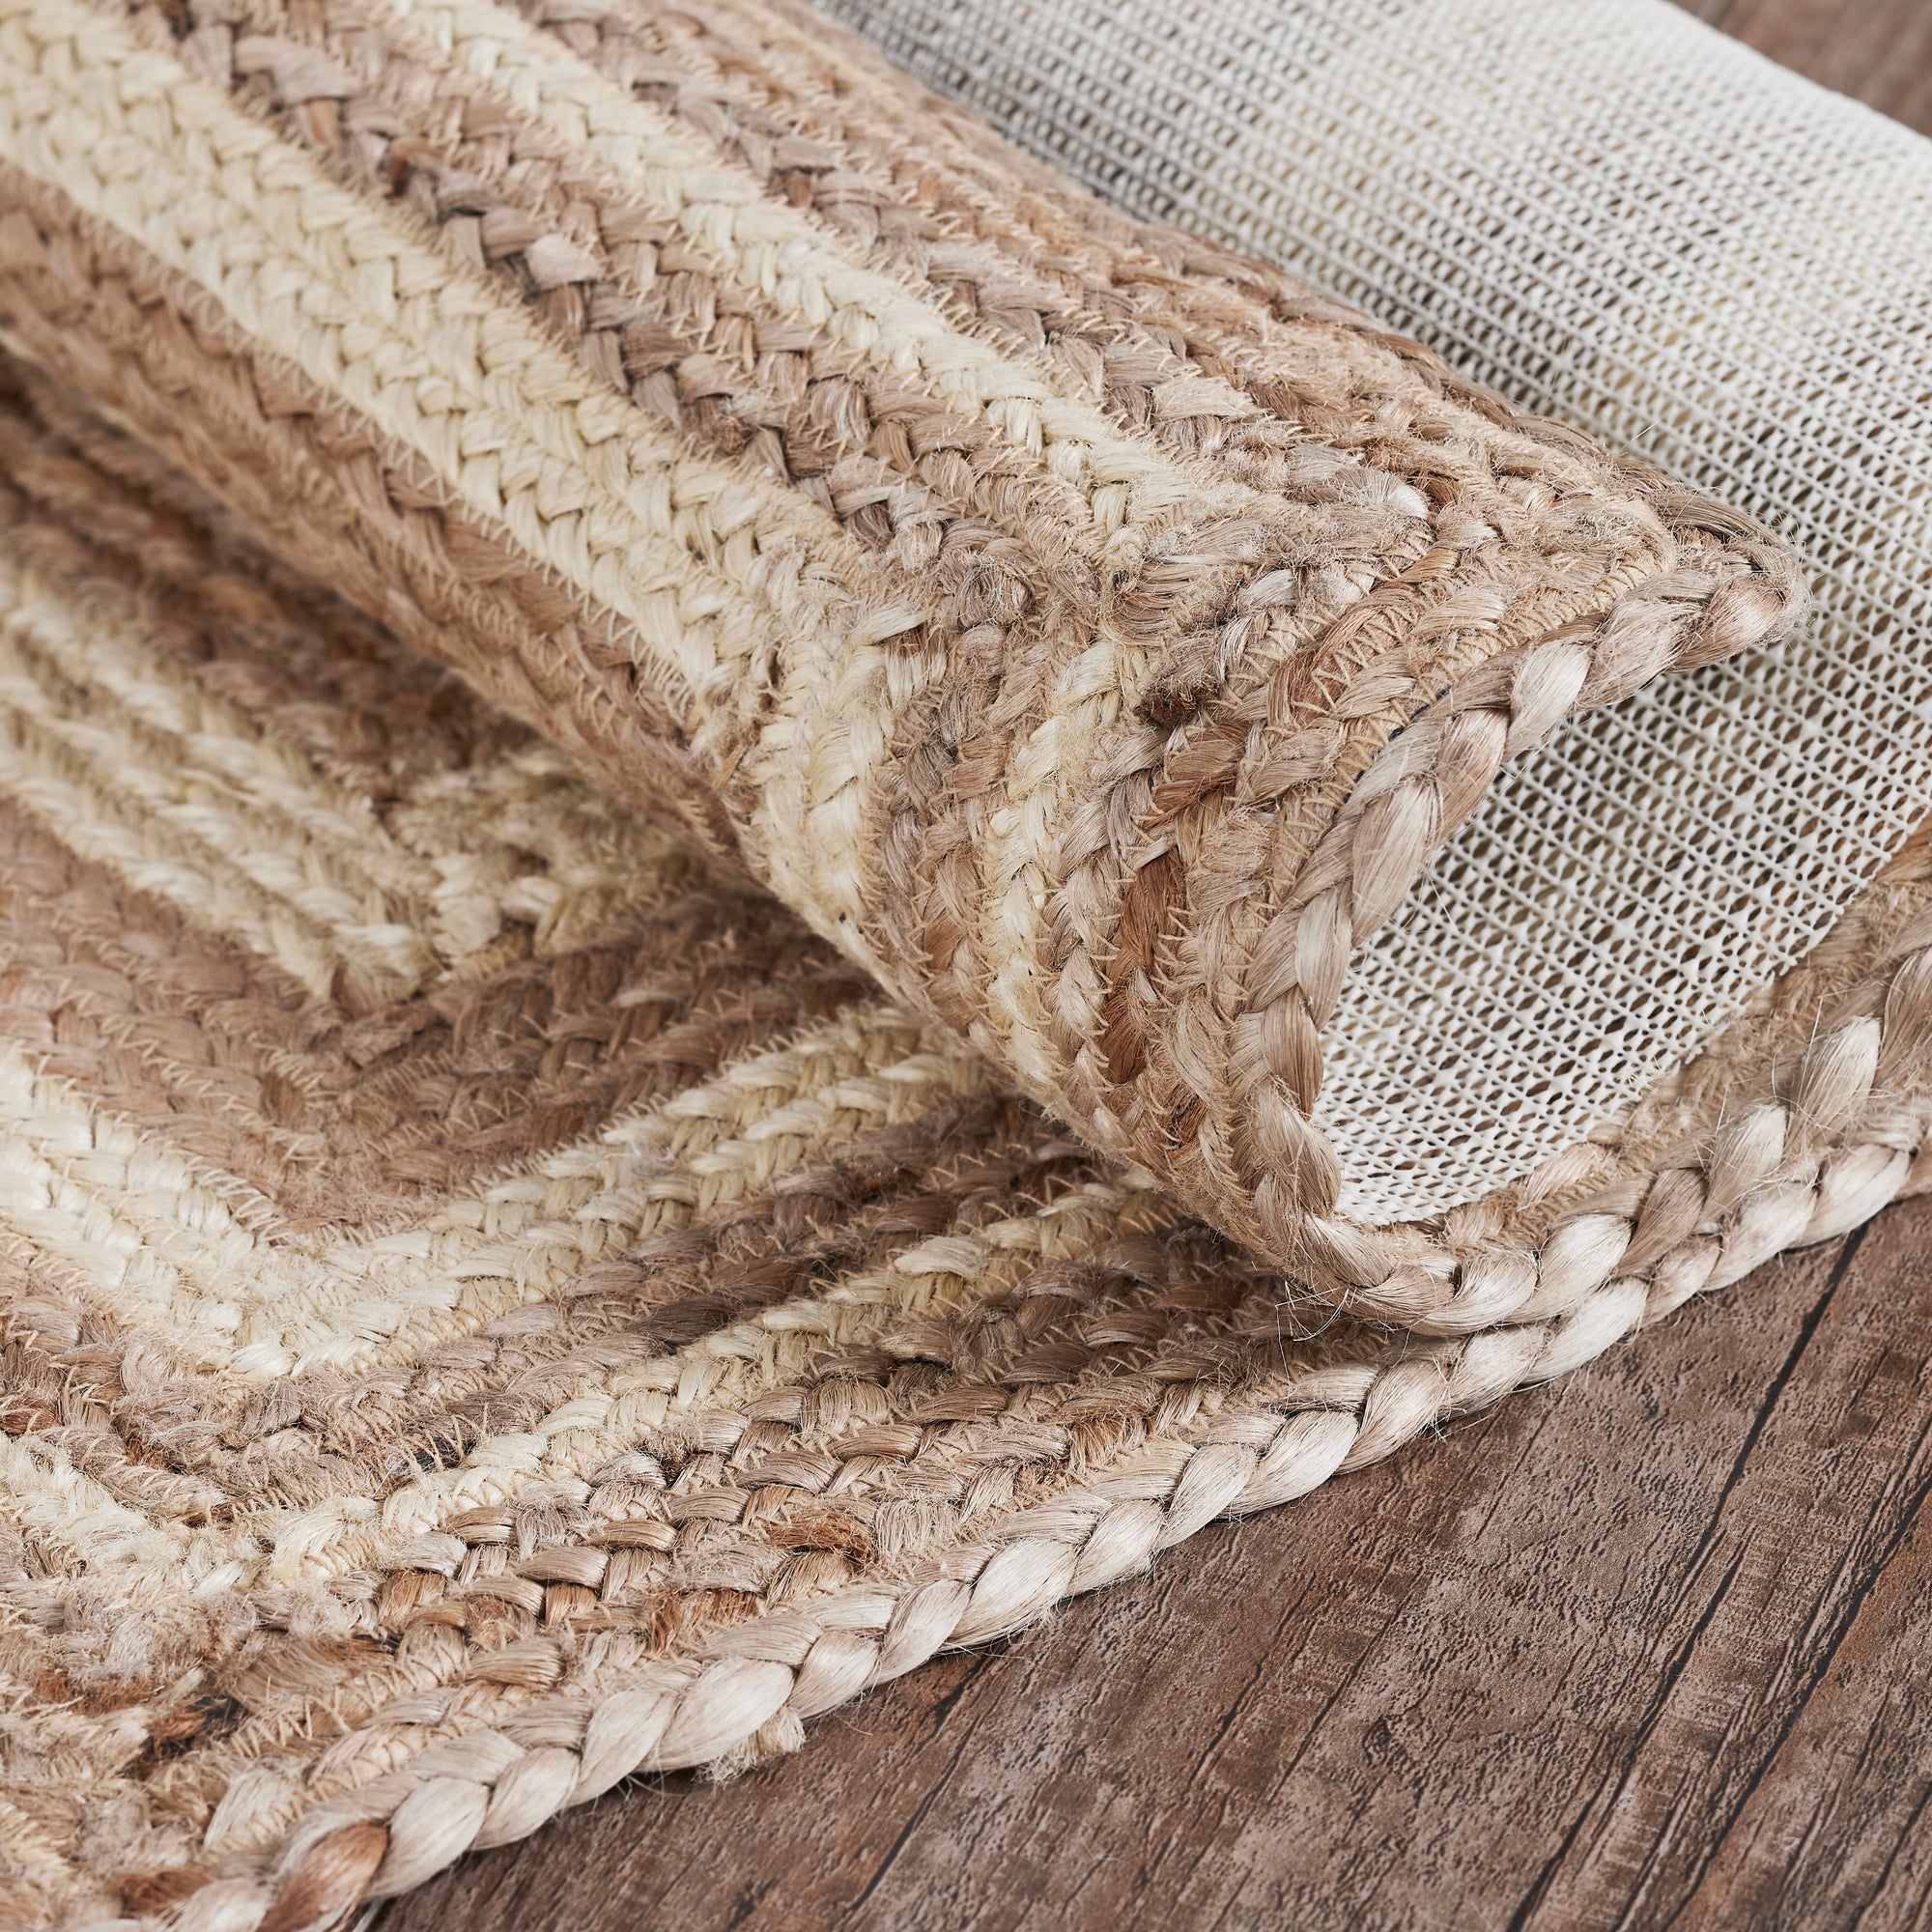 Natural & Creme Jute Braided Rugs Rect with Rug Pads VHC Brands